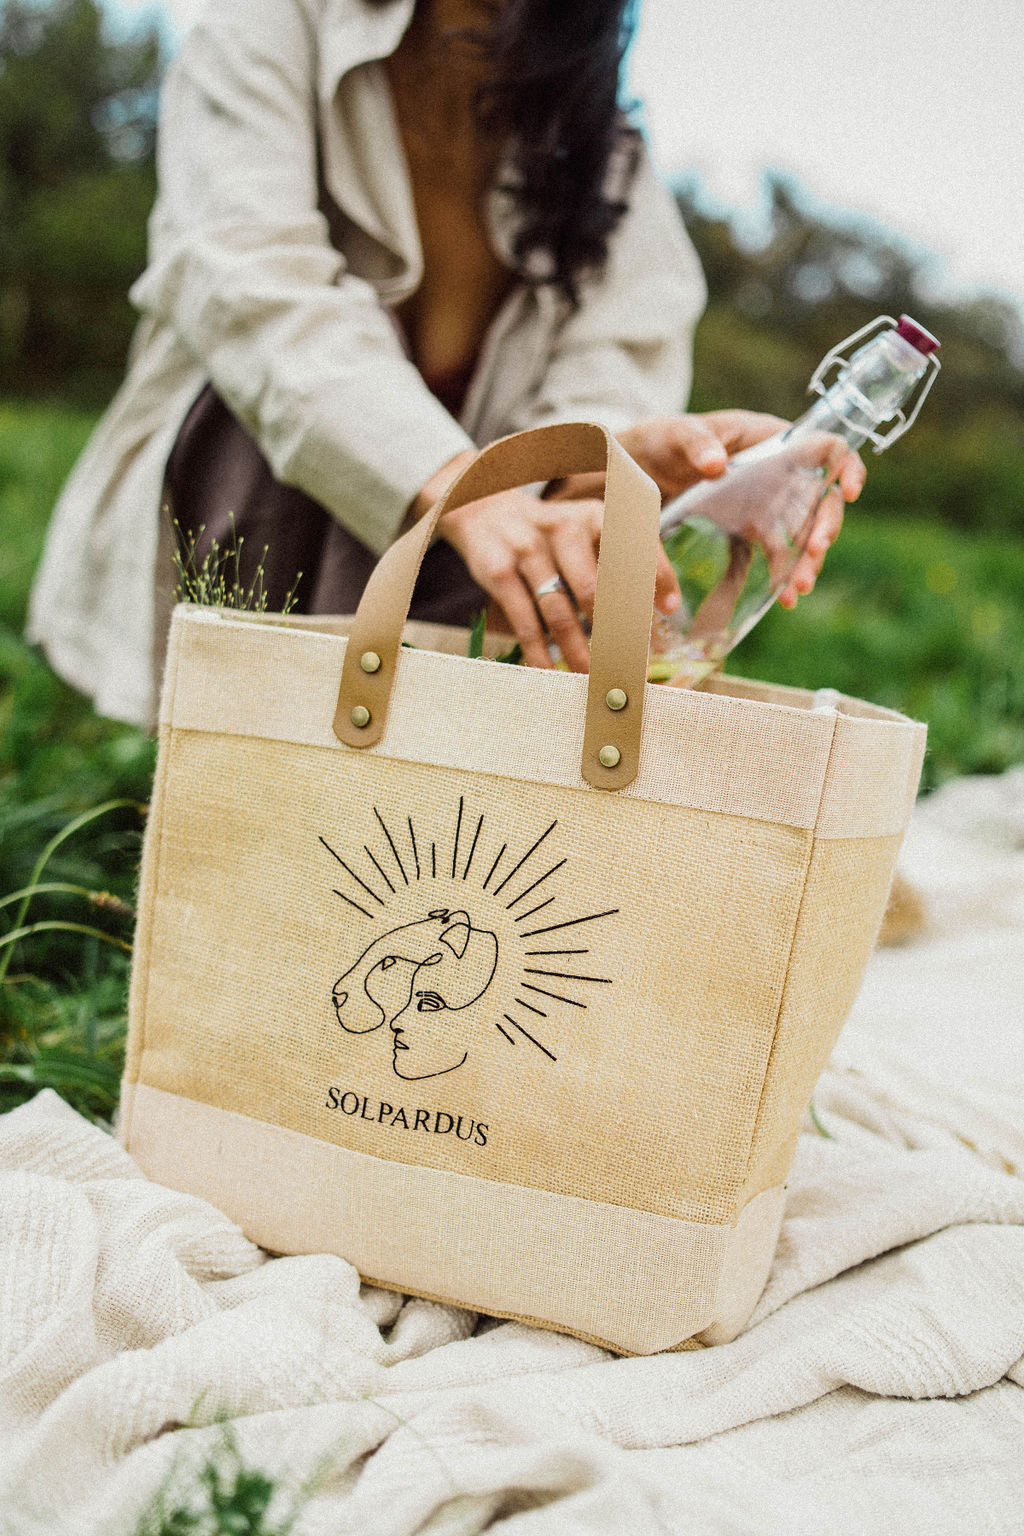 Solpardus ‘Everything’ bag. Jute and juco bag with buffalo leather handles, brass feet and premium flock heat transfer to give the Solpardus logo a luxurious velvet texture. On picnic blanket in Cornwall